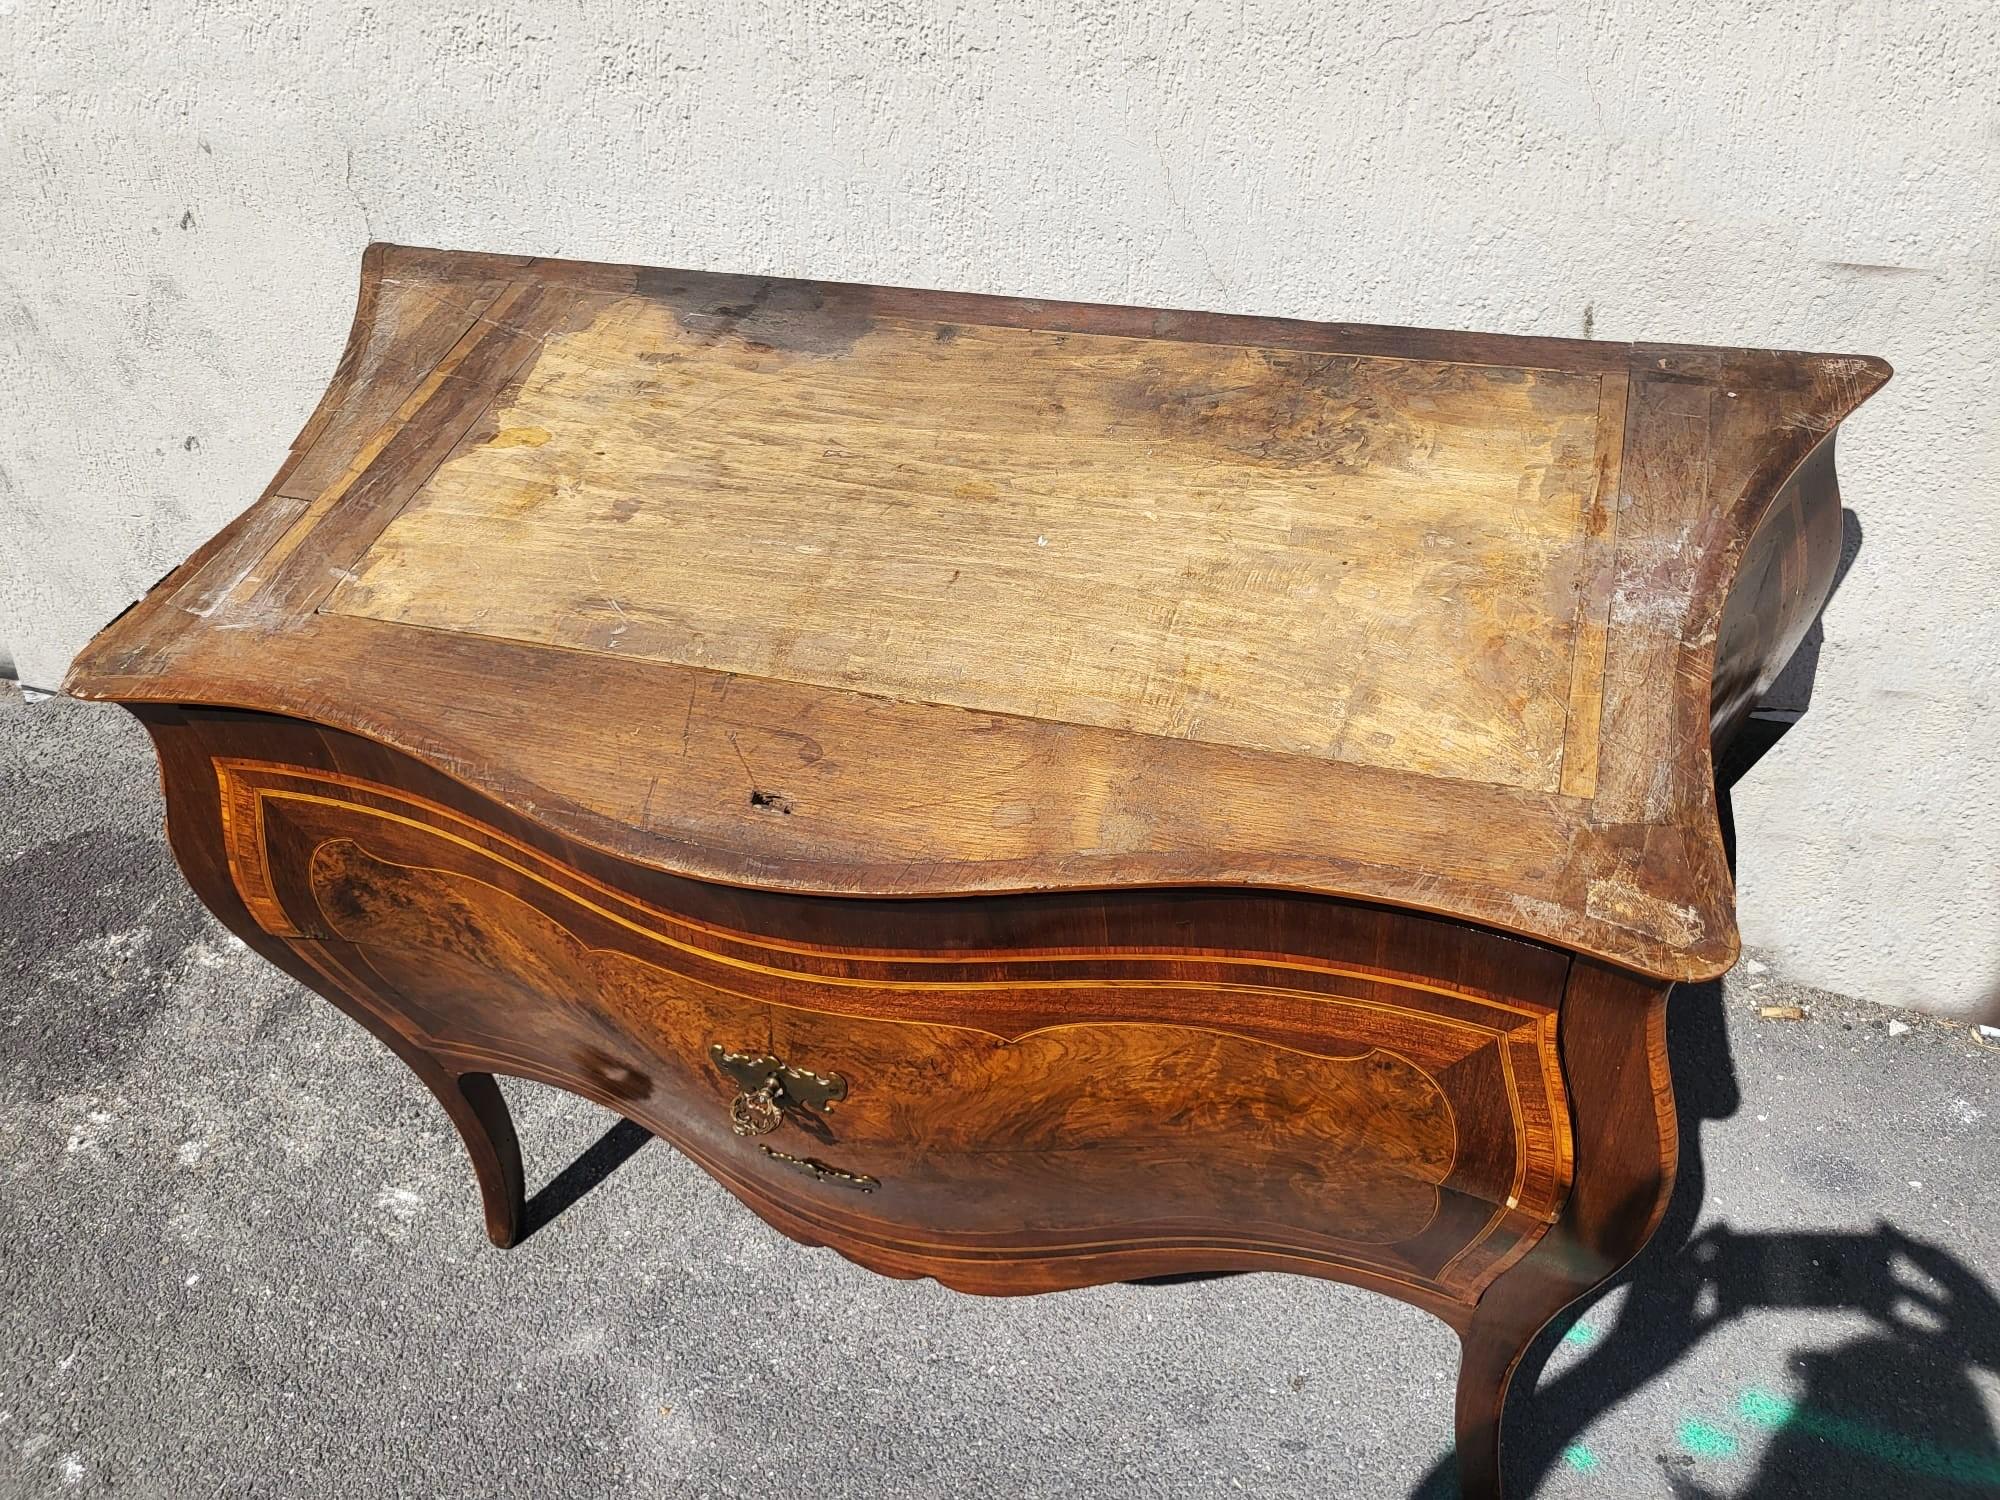 Marble Beautiful Roman Marquetry Commode, 18th Century Period For Sale